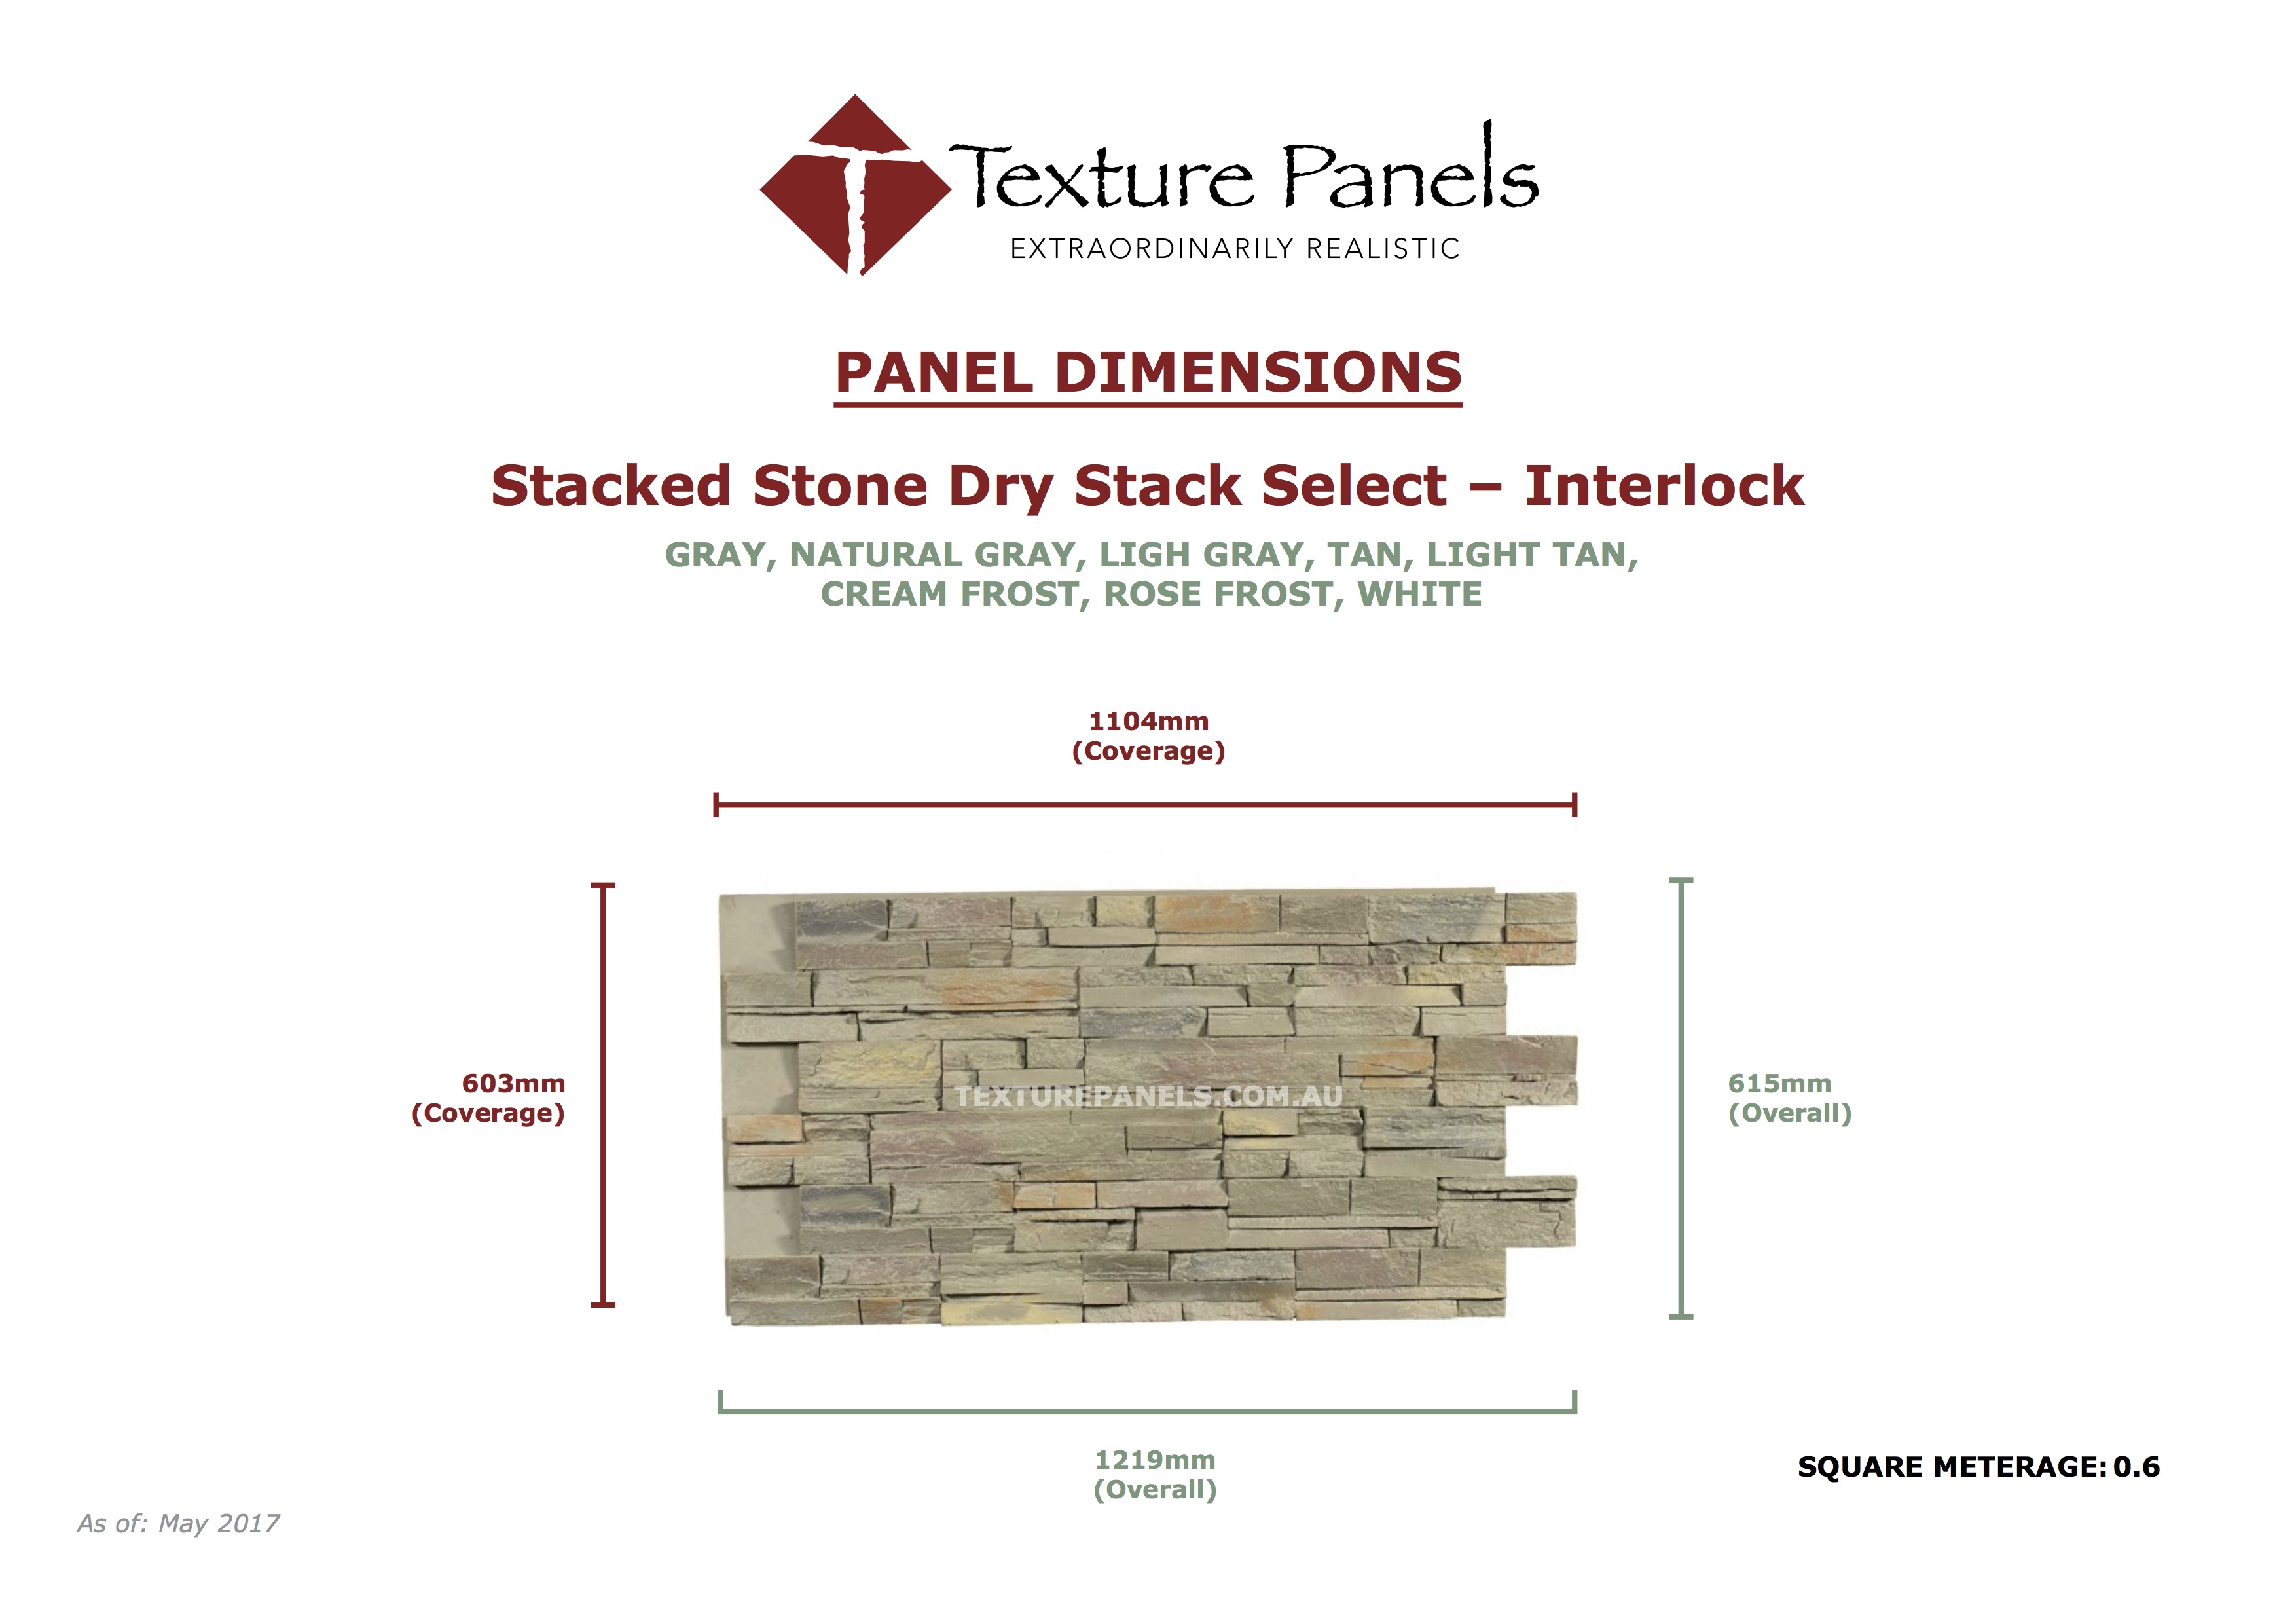 Stacked Stone Dry Interlocked - Dimensions